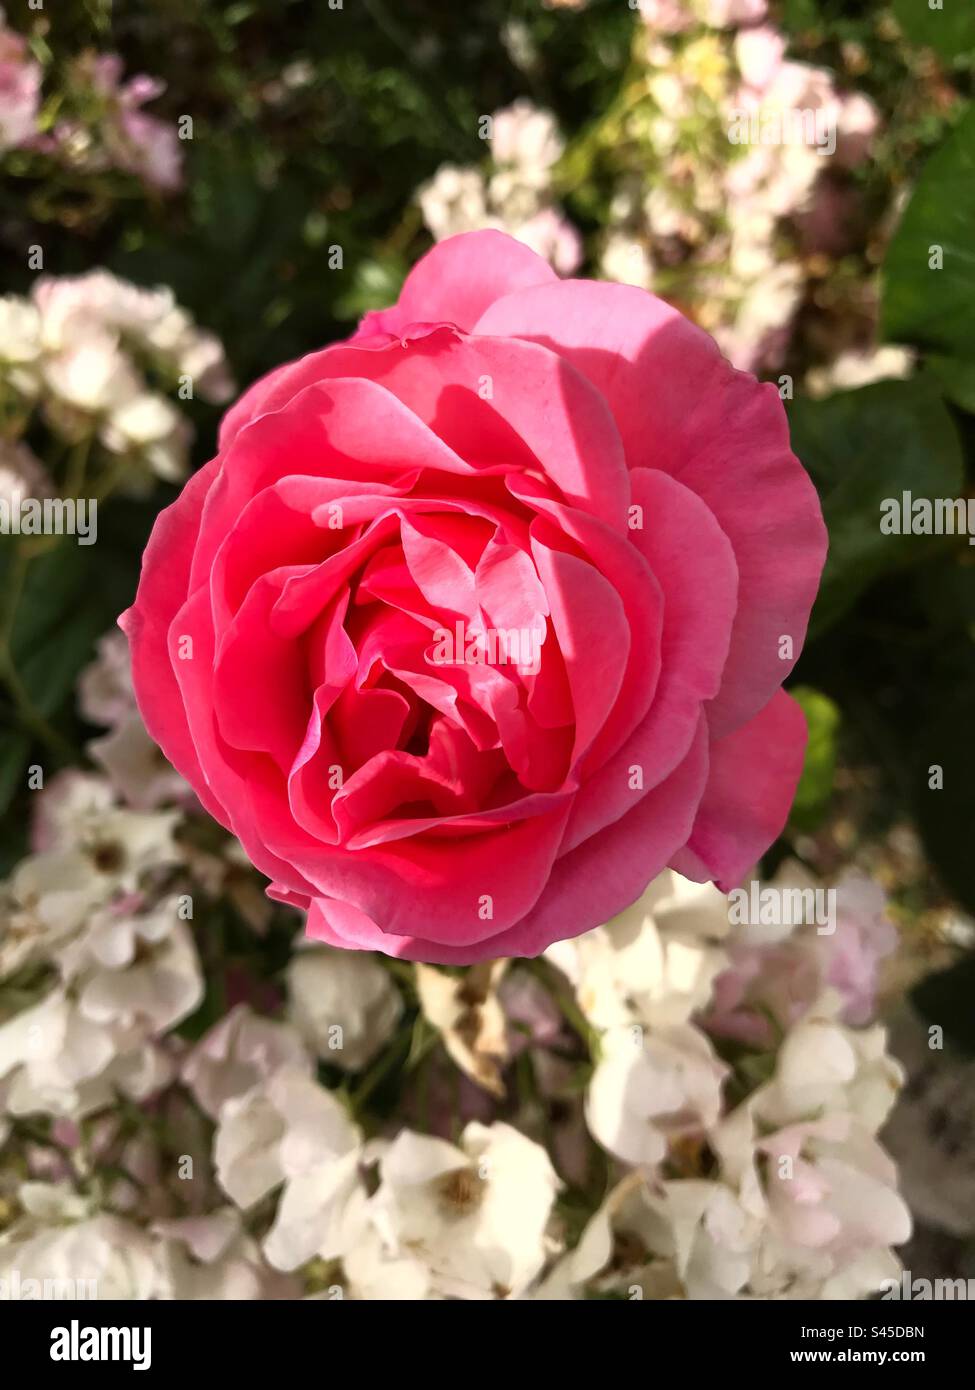 Pink is the colour we most associate with roses. Shades range from softest blush pink, to pure rose pink, right through to bright magenta pink. Stock Photo